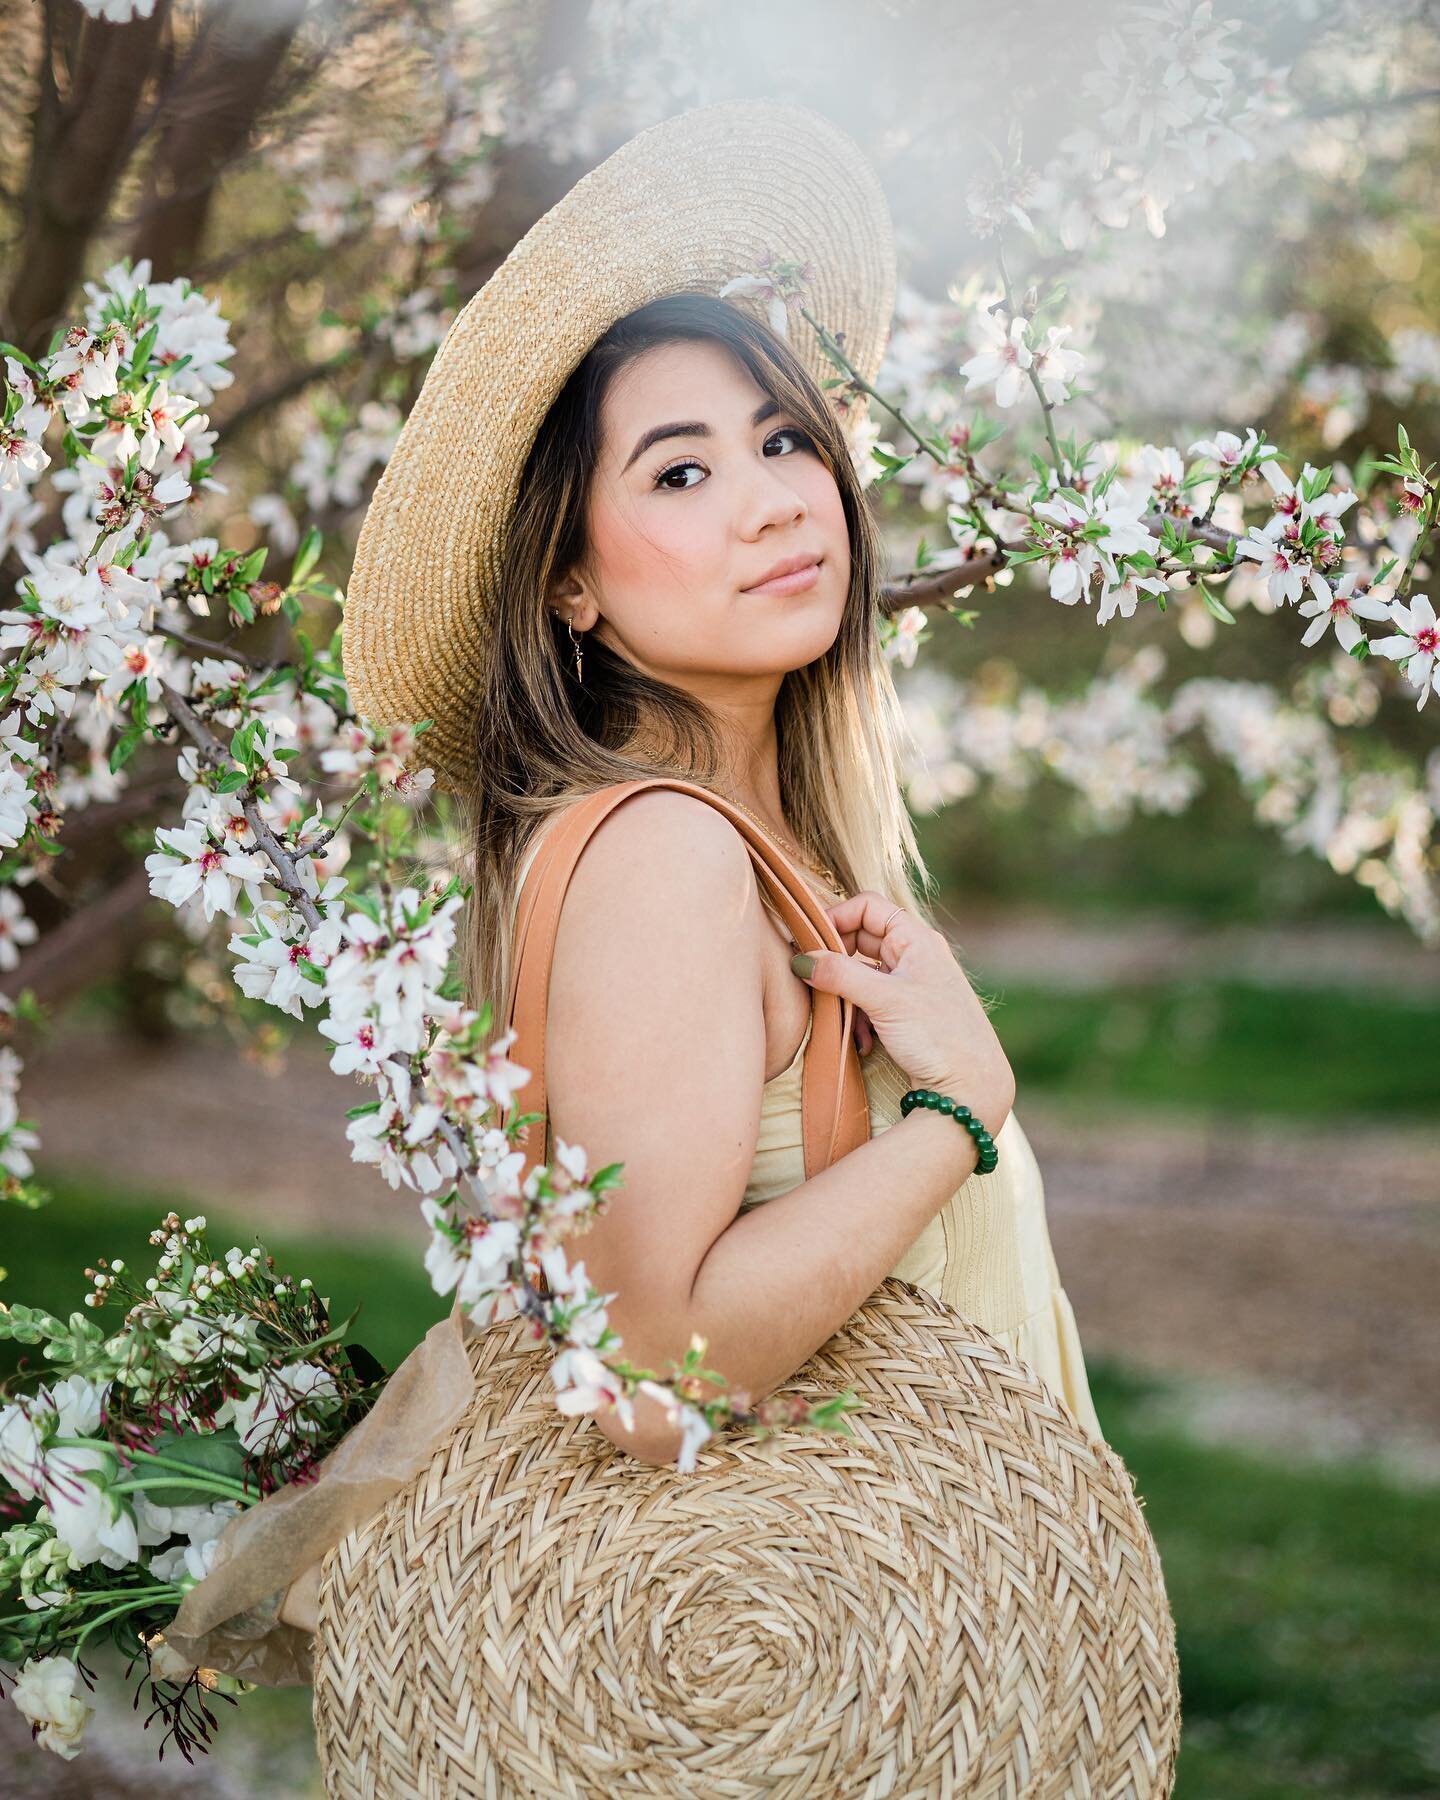 Let&rsquo;s talk about self love...

Prior to this photoshoot, I spent almost a full week at home feeling down in the dumps. I forced myself to get out with the help of @deeque_ and I&rsquo;m so glad we went on a date to see almond blossoms.

On our 